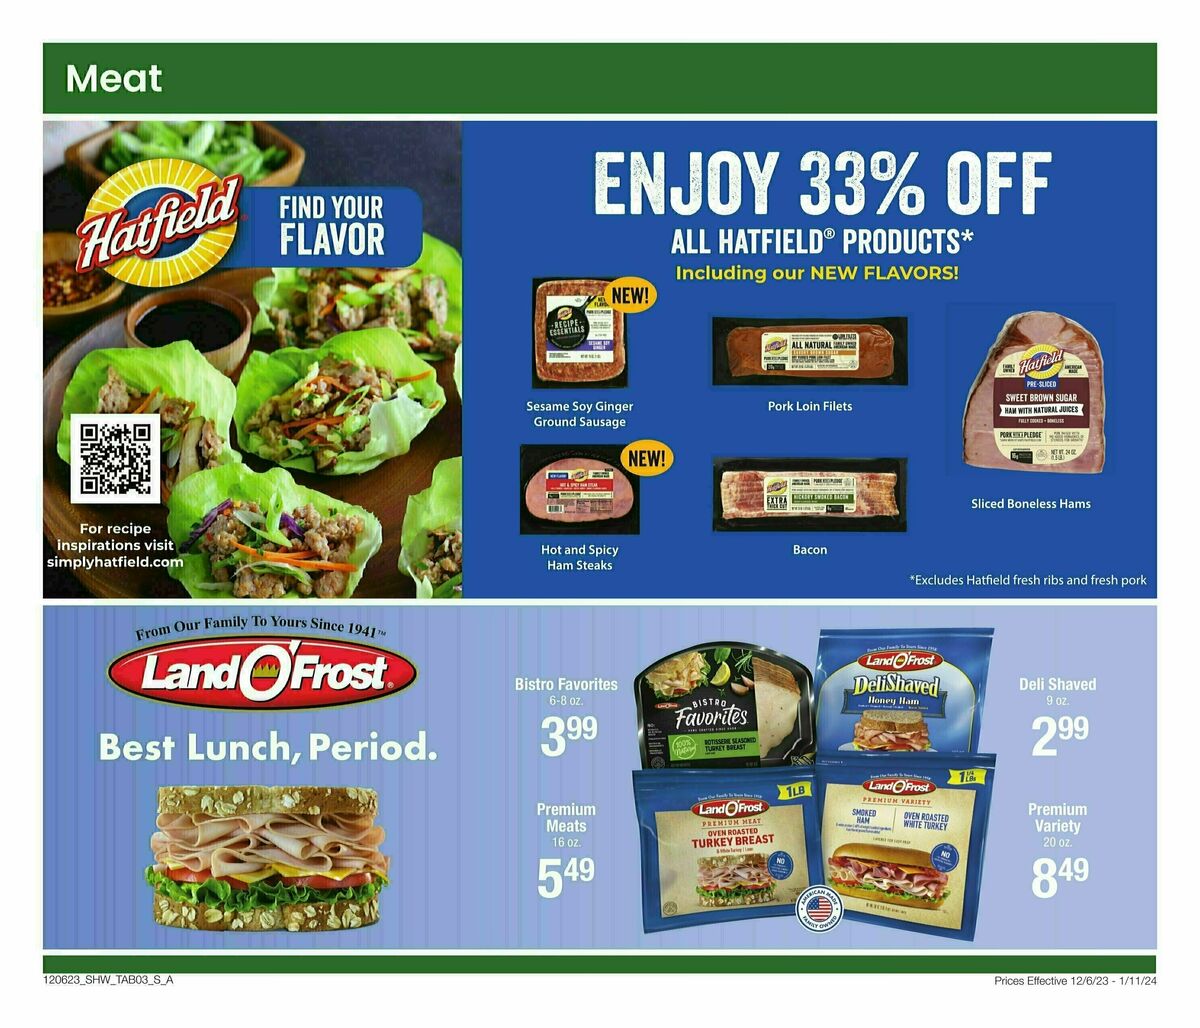 Shaw's Big Book of Savings Weekly Ad from December 6